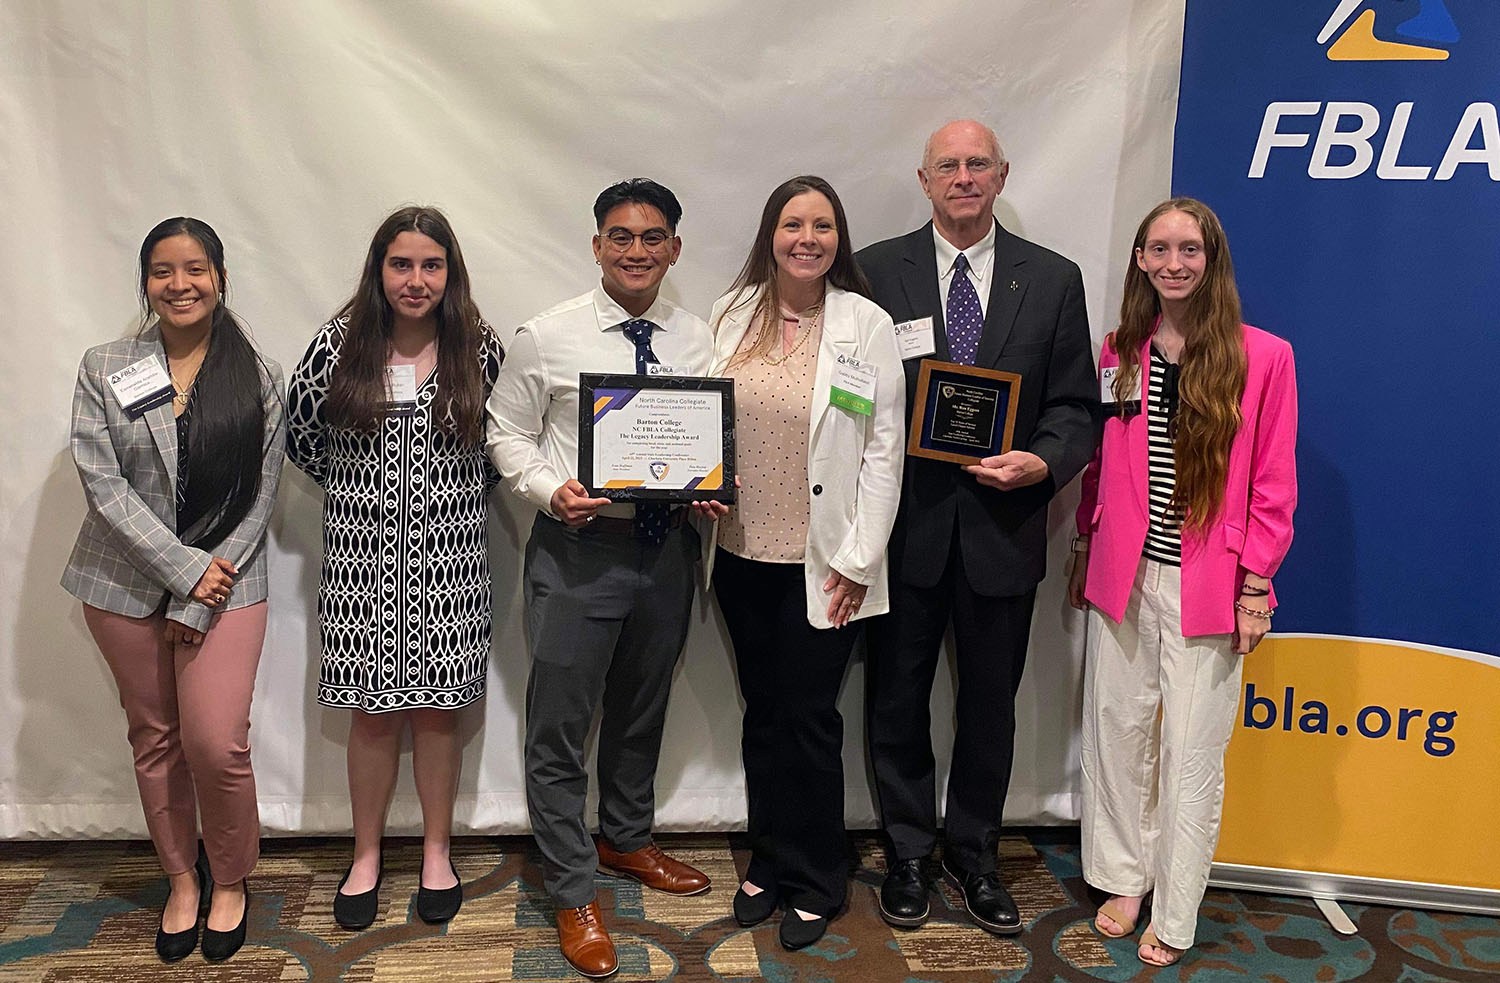 Featured image for post: Barton Students Shine at FBLA-Collegiate State Conference